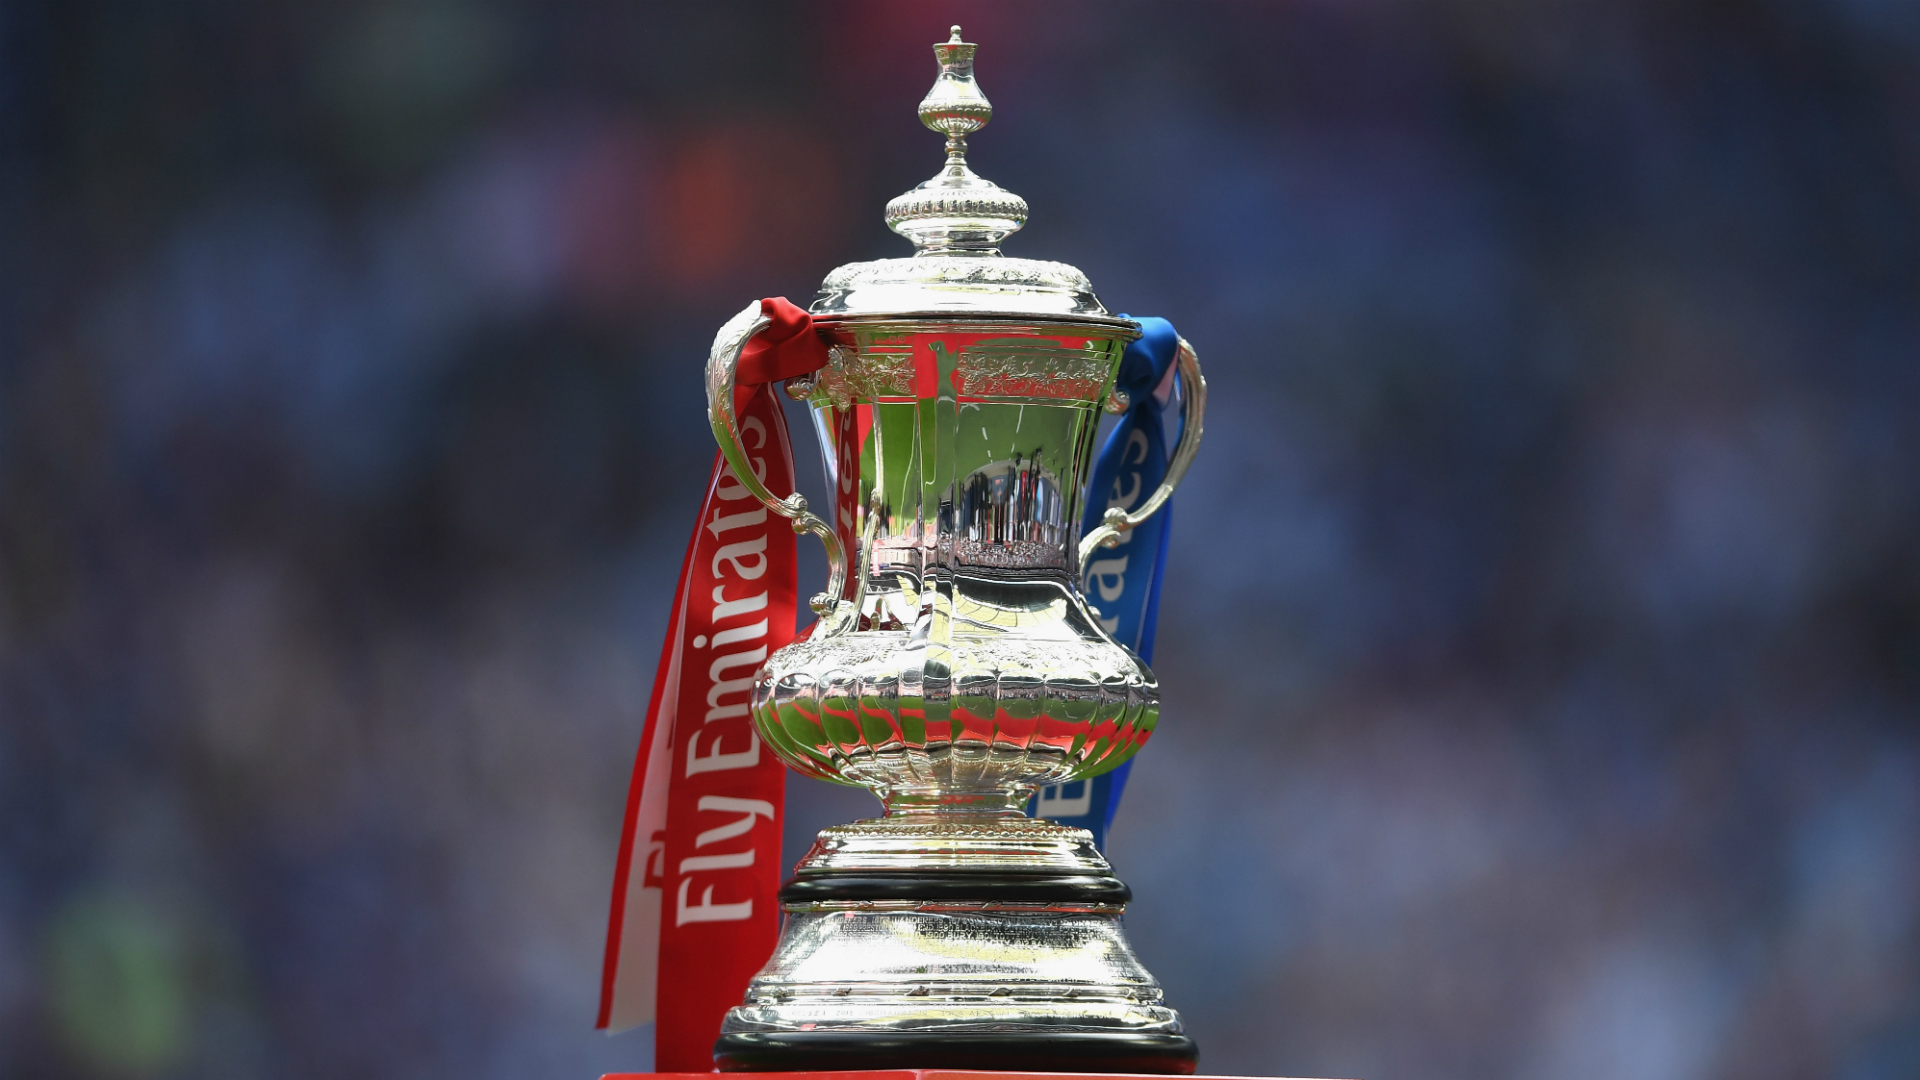 The last weekend of June is when the FA Cup quarter-finals will take place if all goes to plan, with the final at the start of August.